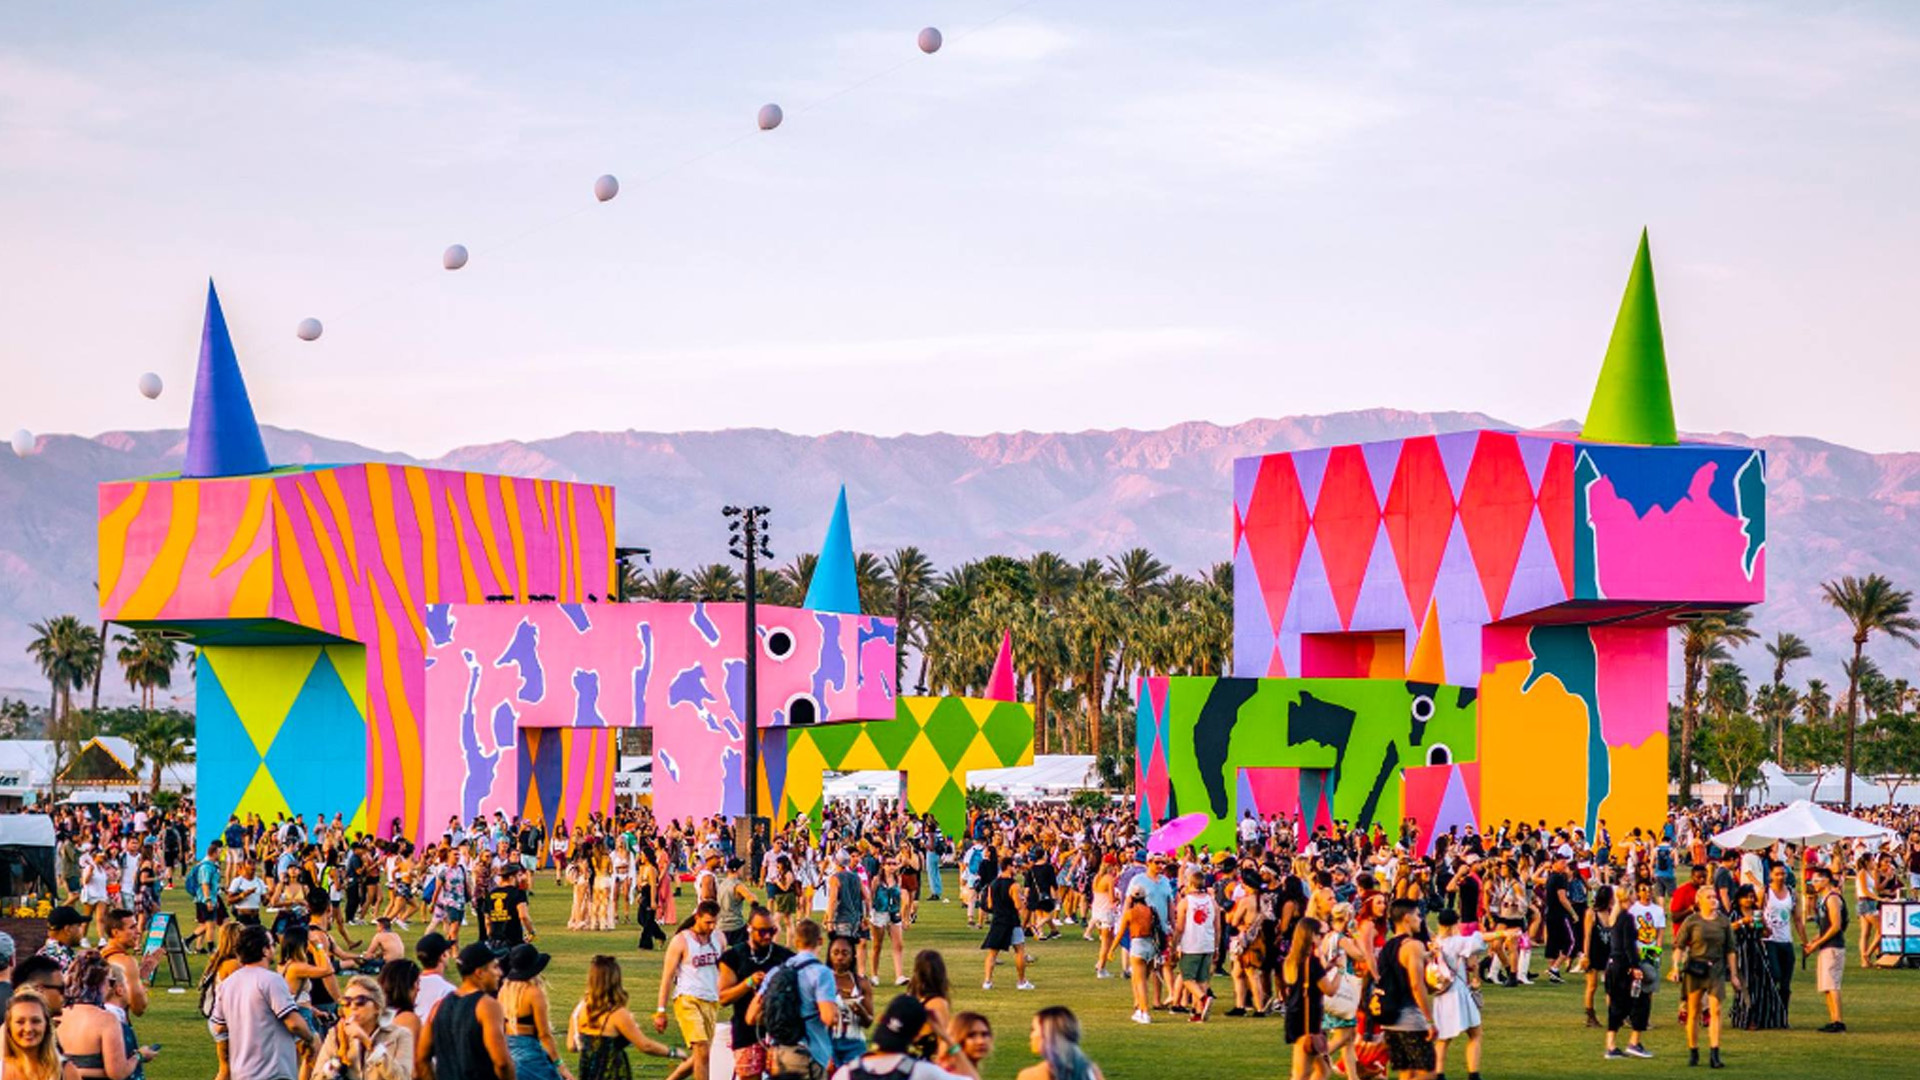 Coachella: The music festival plays out across five main stages: the Coachella Stage, Outdoor Theater, Gobi Tent, Mojave Tent, and the Sahara Tent. 1920x1080 Full HD Background.